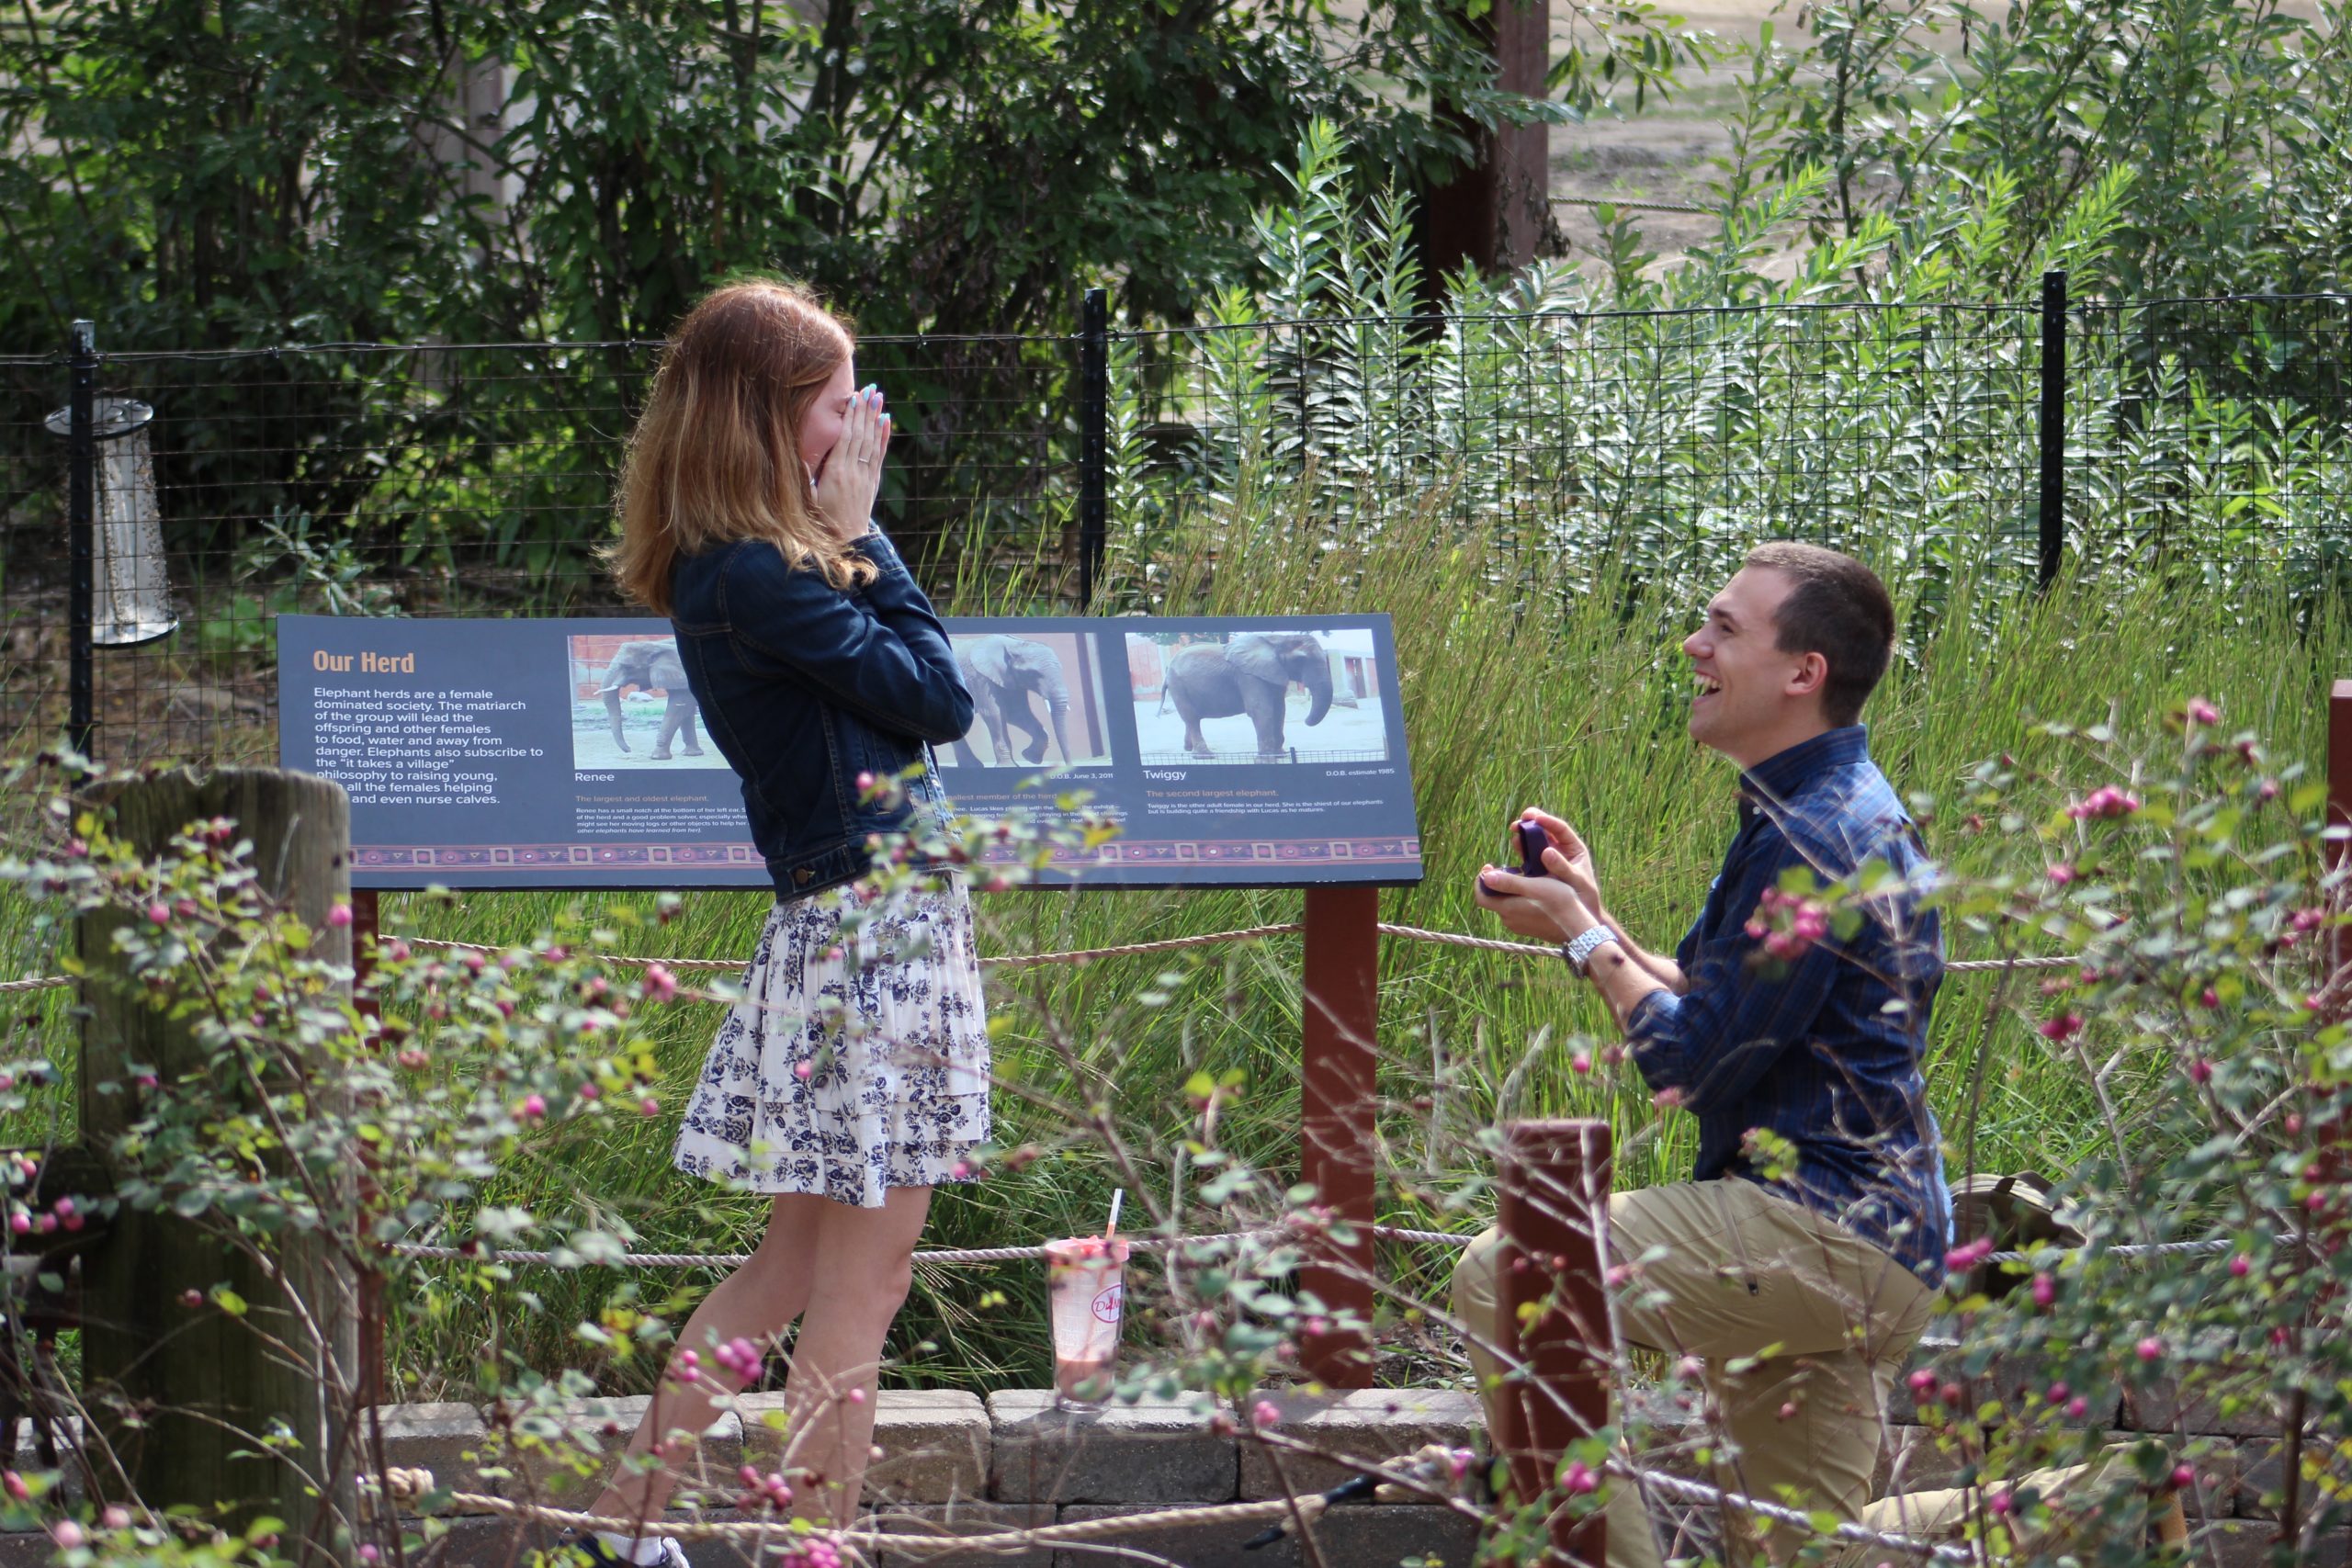 Boyfriend Proposing to His Girlfriend at the Zoo